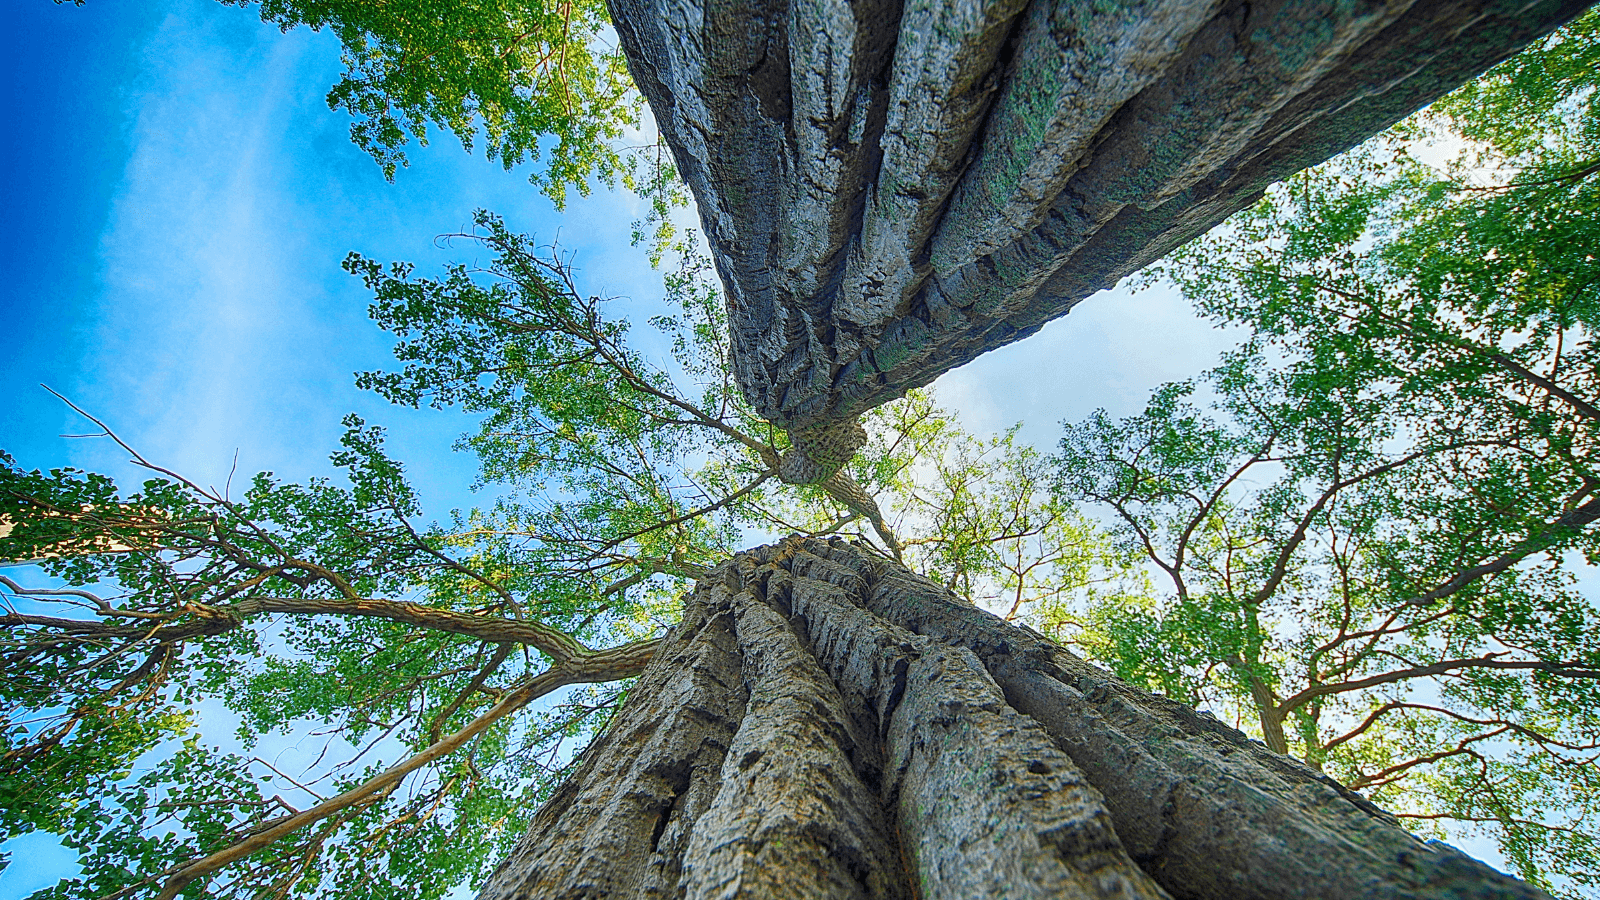 A picture of two strong, tall tree's - growing beside each other.